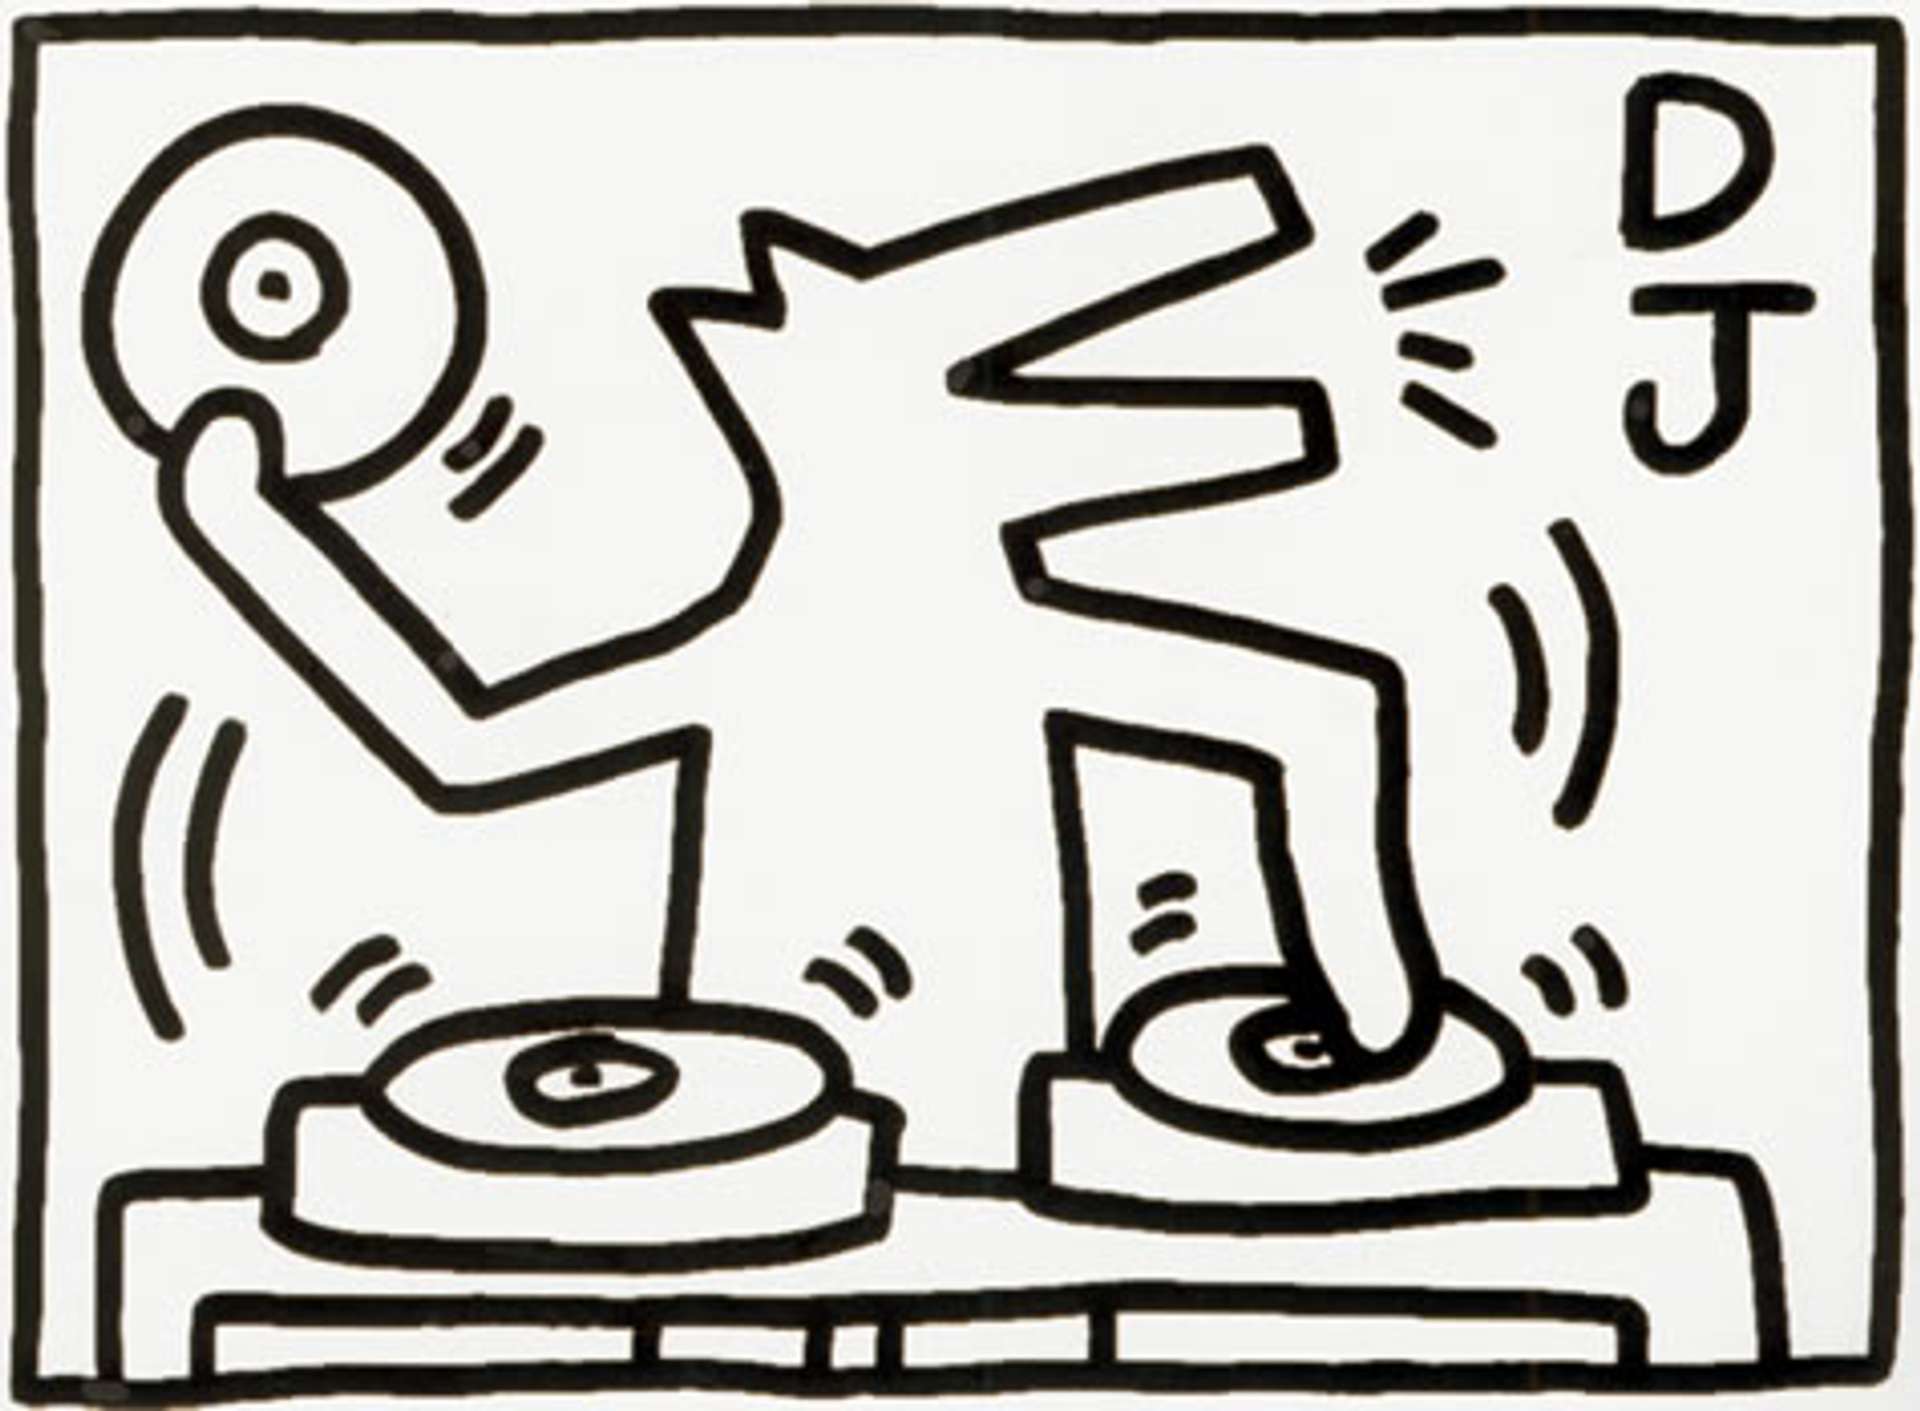 DJ by Keith Haring